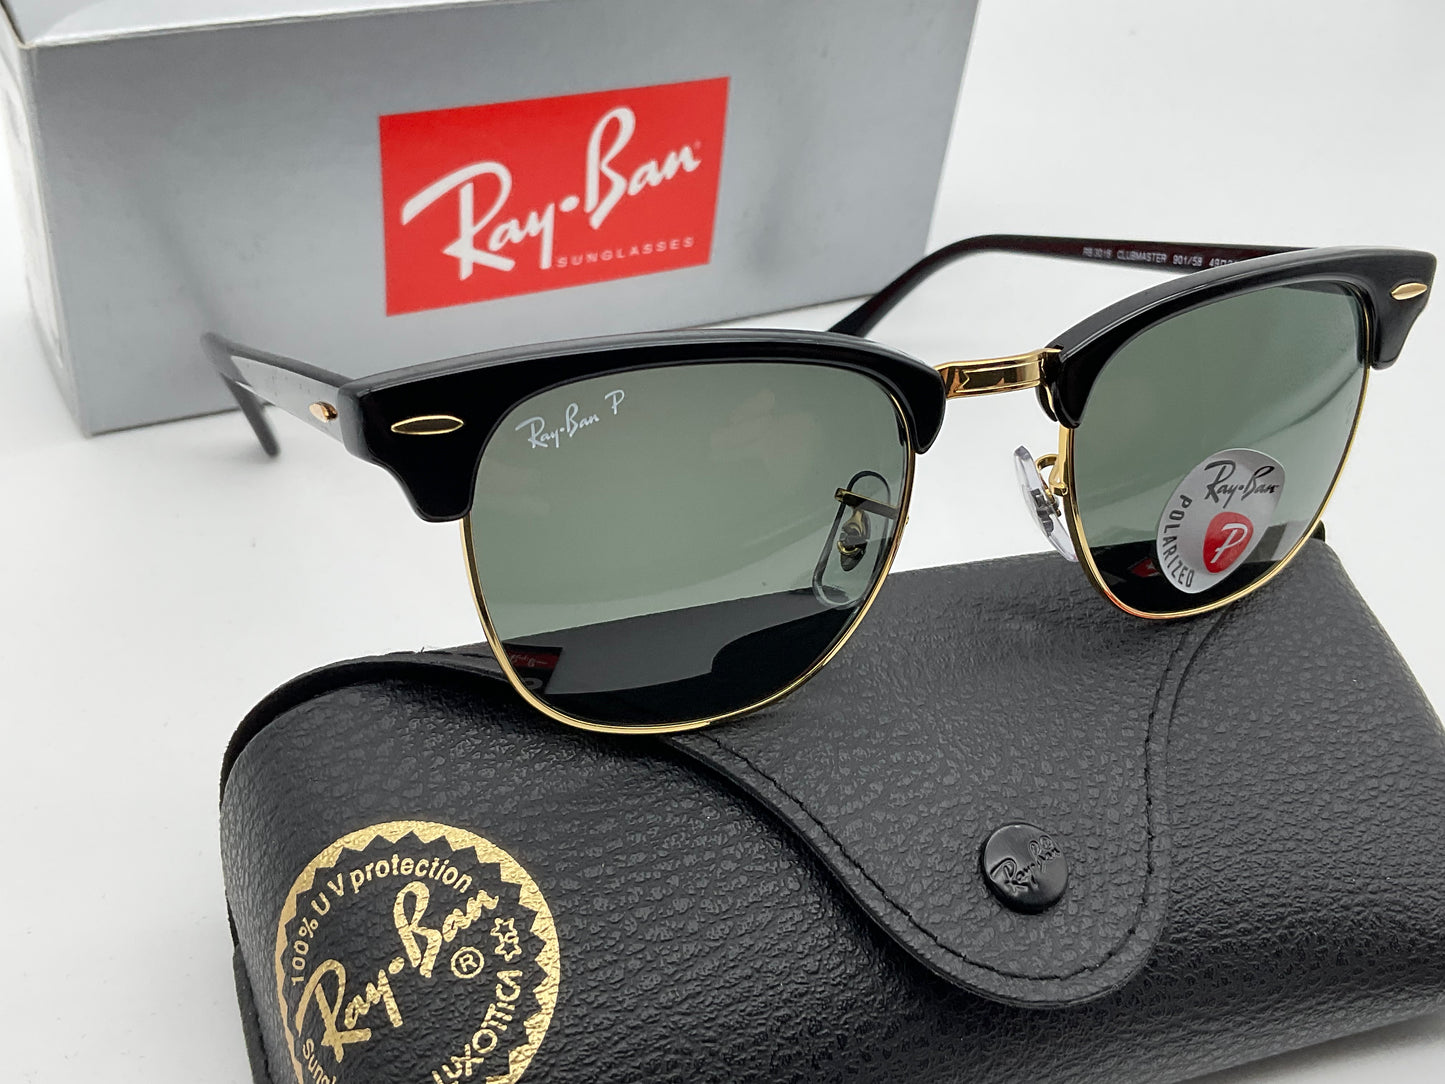 Ray-Ban Clubmaster 49mm Black G-15 Green Polarized Sunglasses RB3016 901/58 MSRP $213